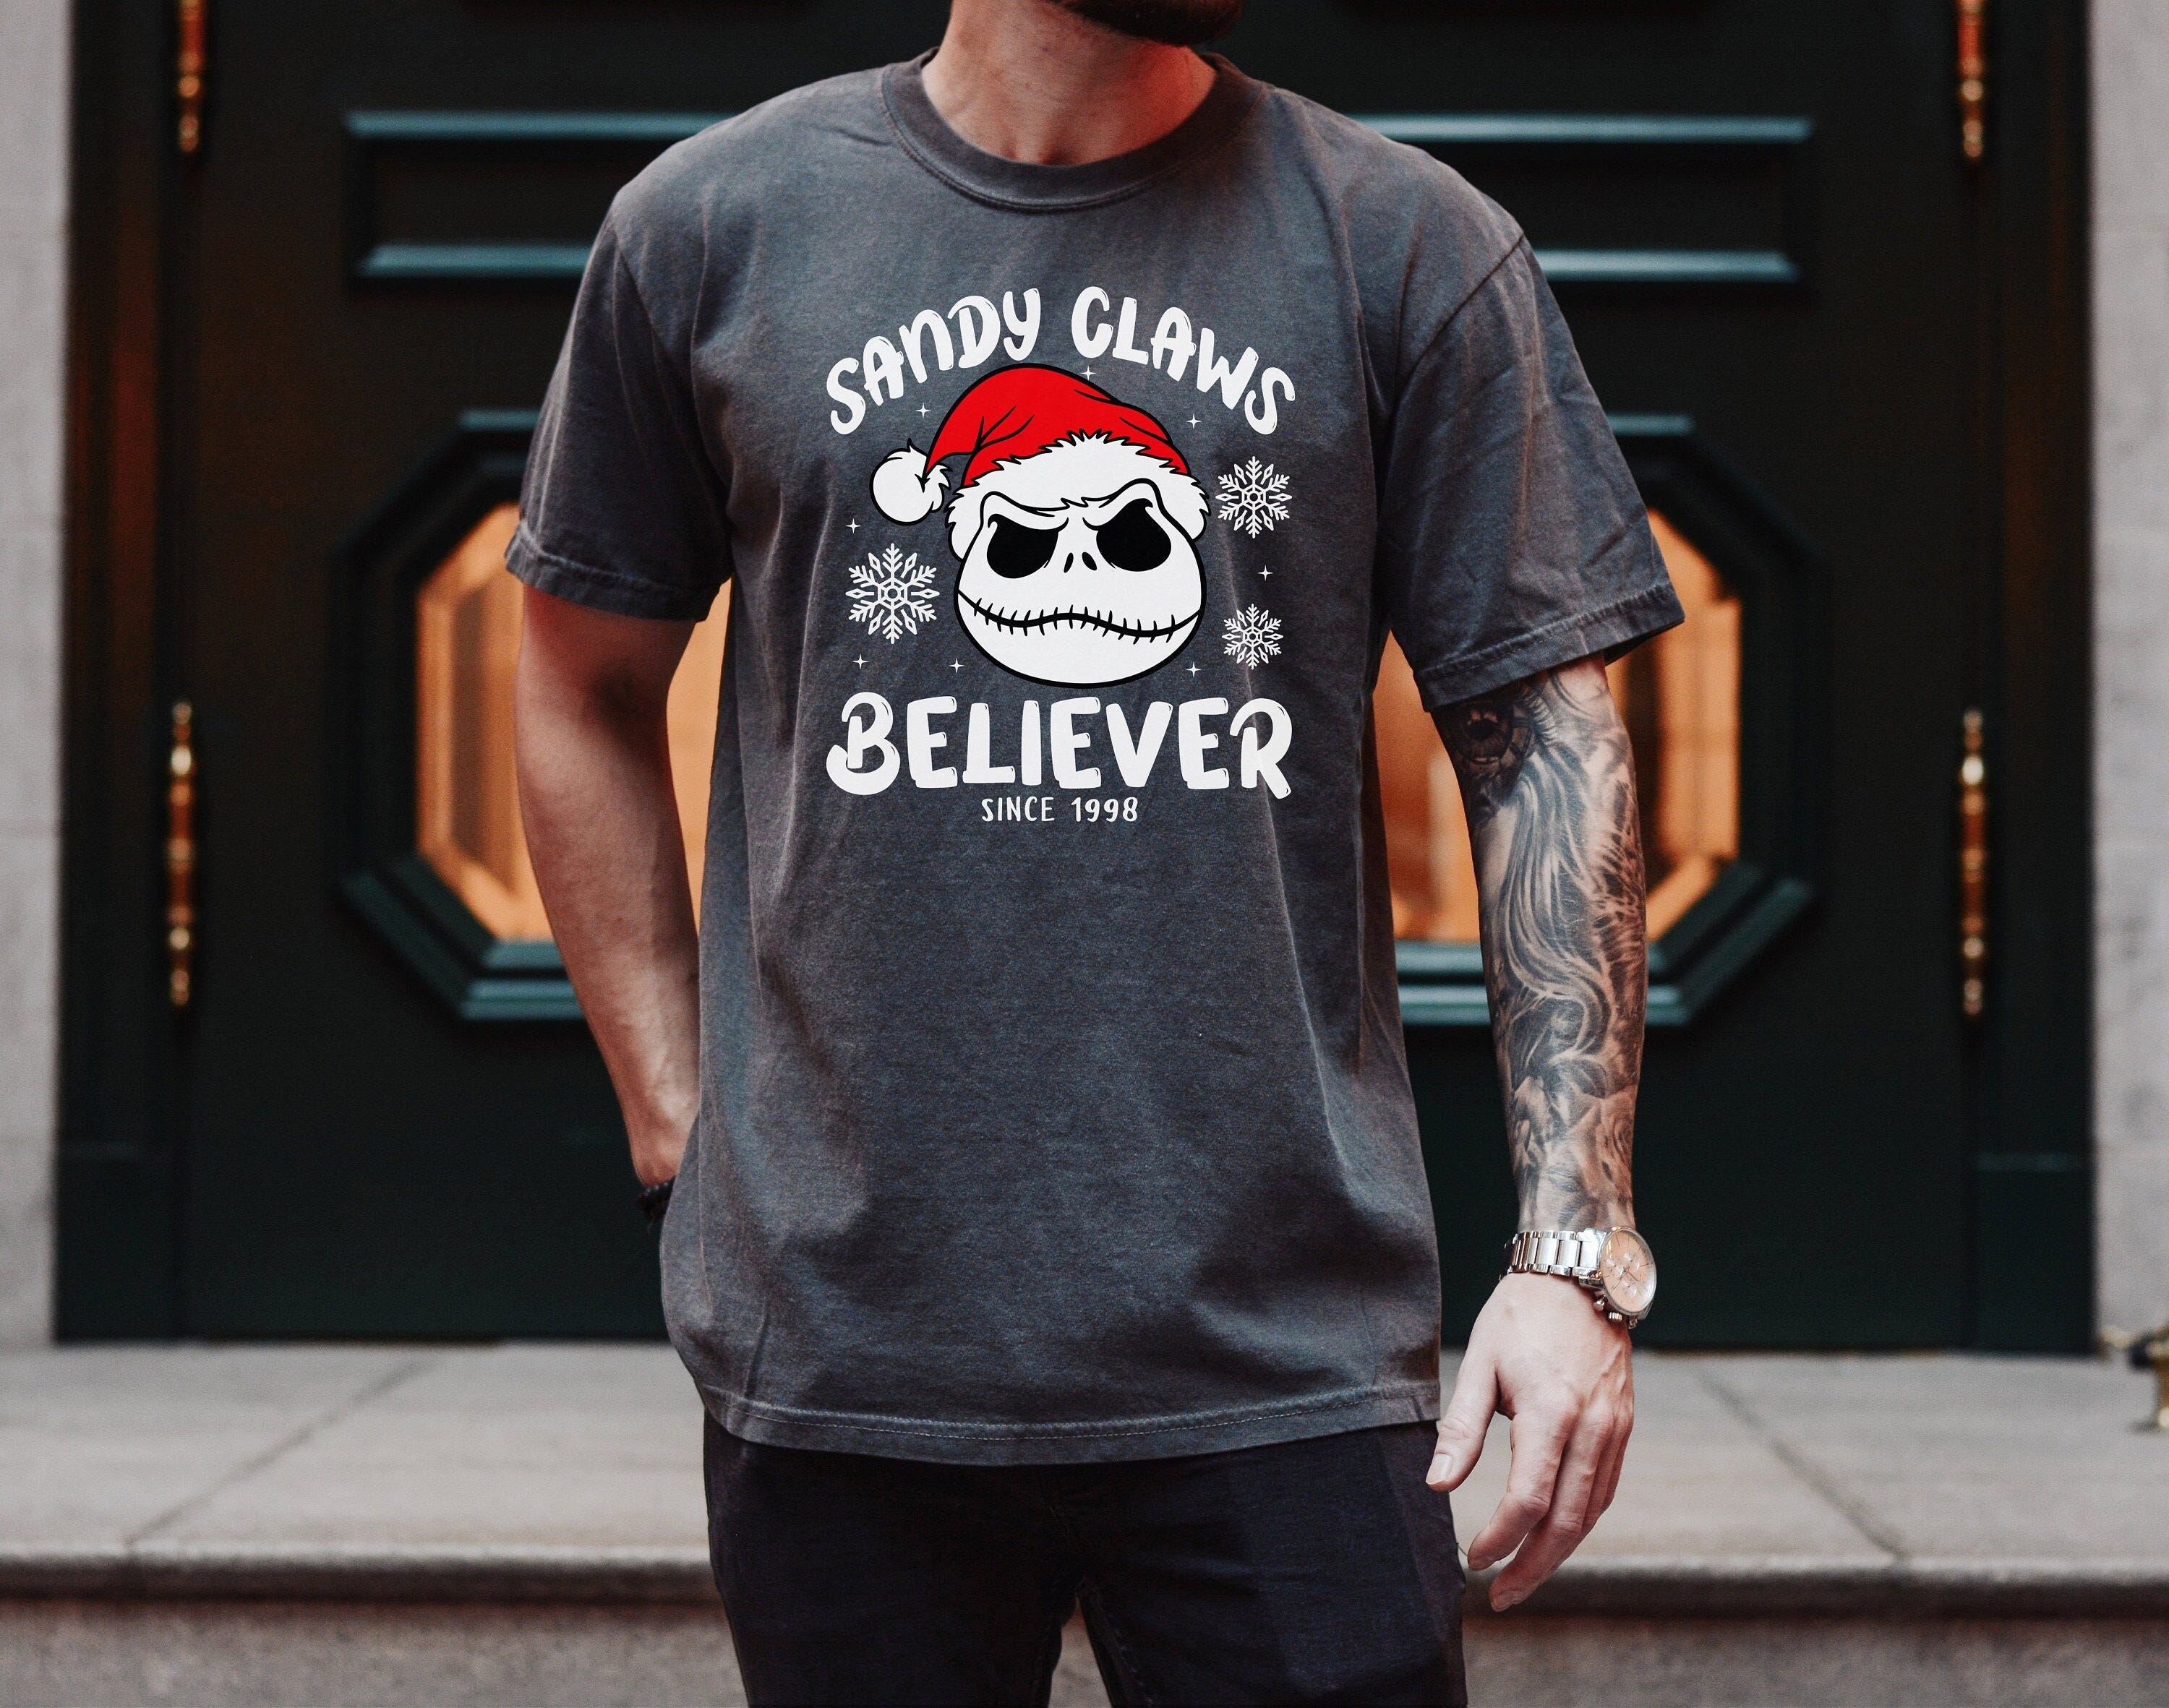 Sandy Claws Believer Inspired by Nightmare Before Christmas Jack Skellington Shirt, Christmas Vibes, The Nightmare Before Christmas Shirt